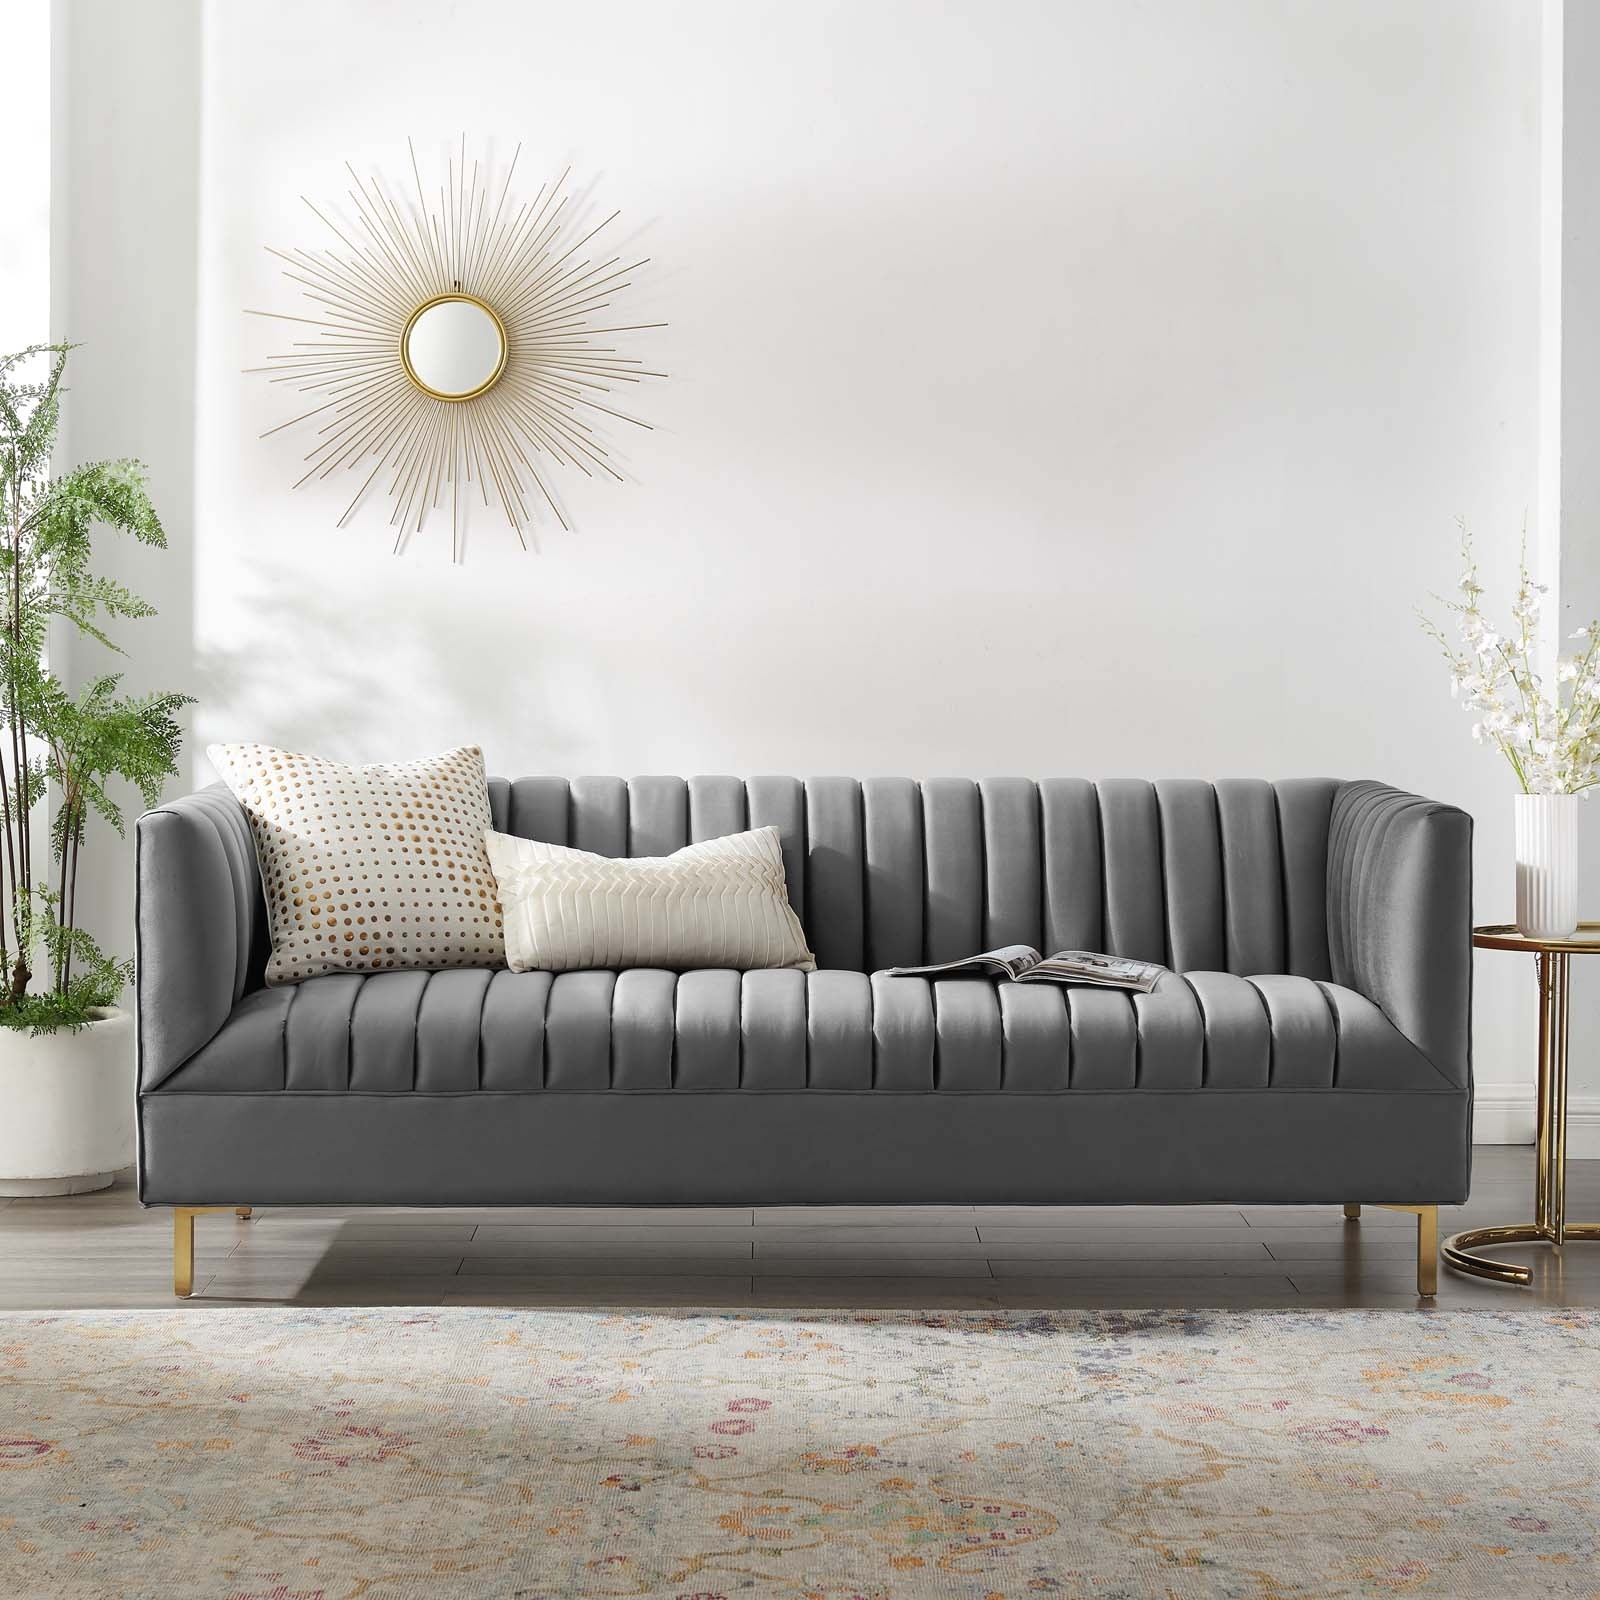 Shift Channel Tufted Performance Velvet Sofa In Gray Hyme Furniture